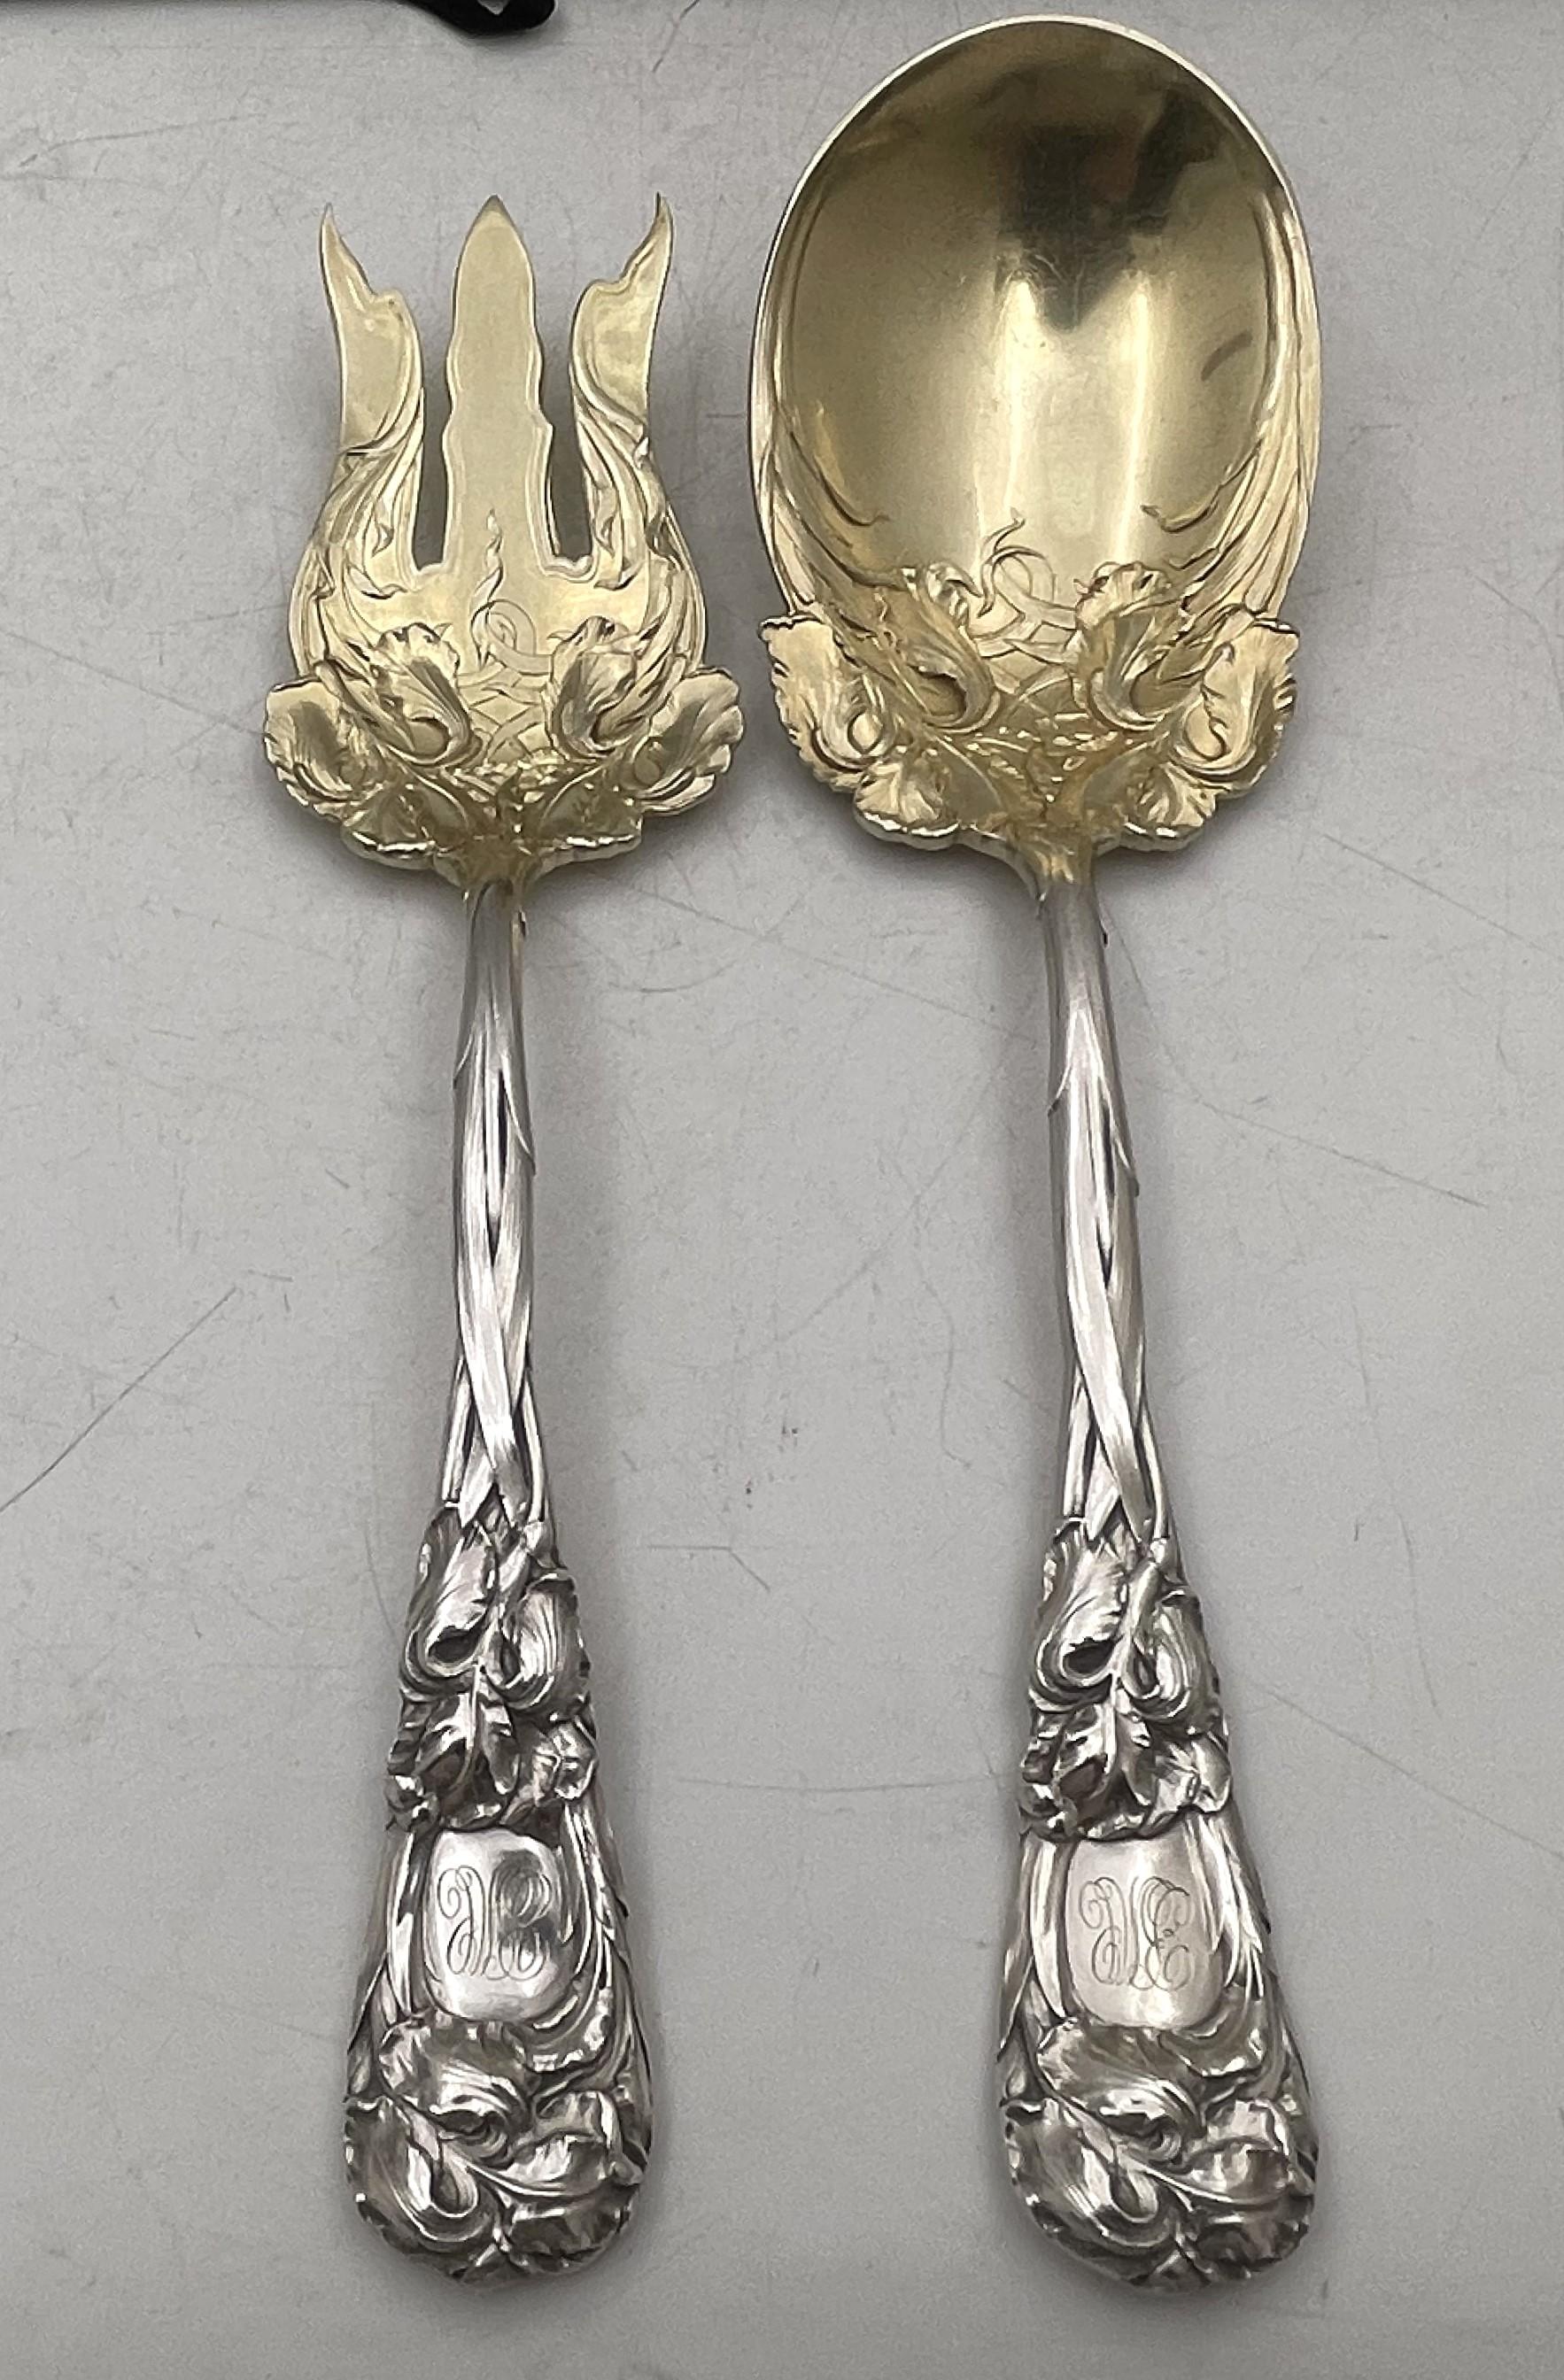 Durgin sterling silver salad serving set in the celebrated New Art Pattern and in Art Nouveau Style. In heavy gage and with gilt wash bowls, the fork and spoon are in crisp condition and measure 9 1/4'' in length. Hallmarks are shown.

William B.